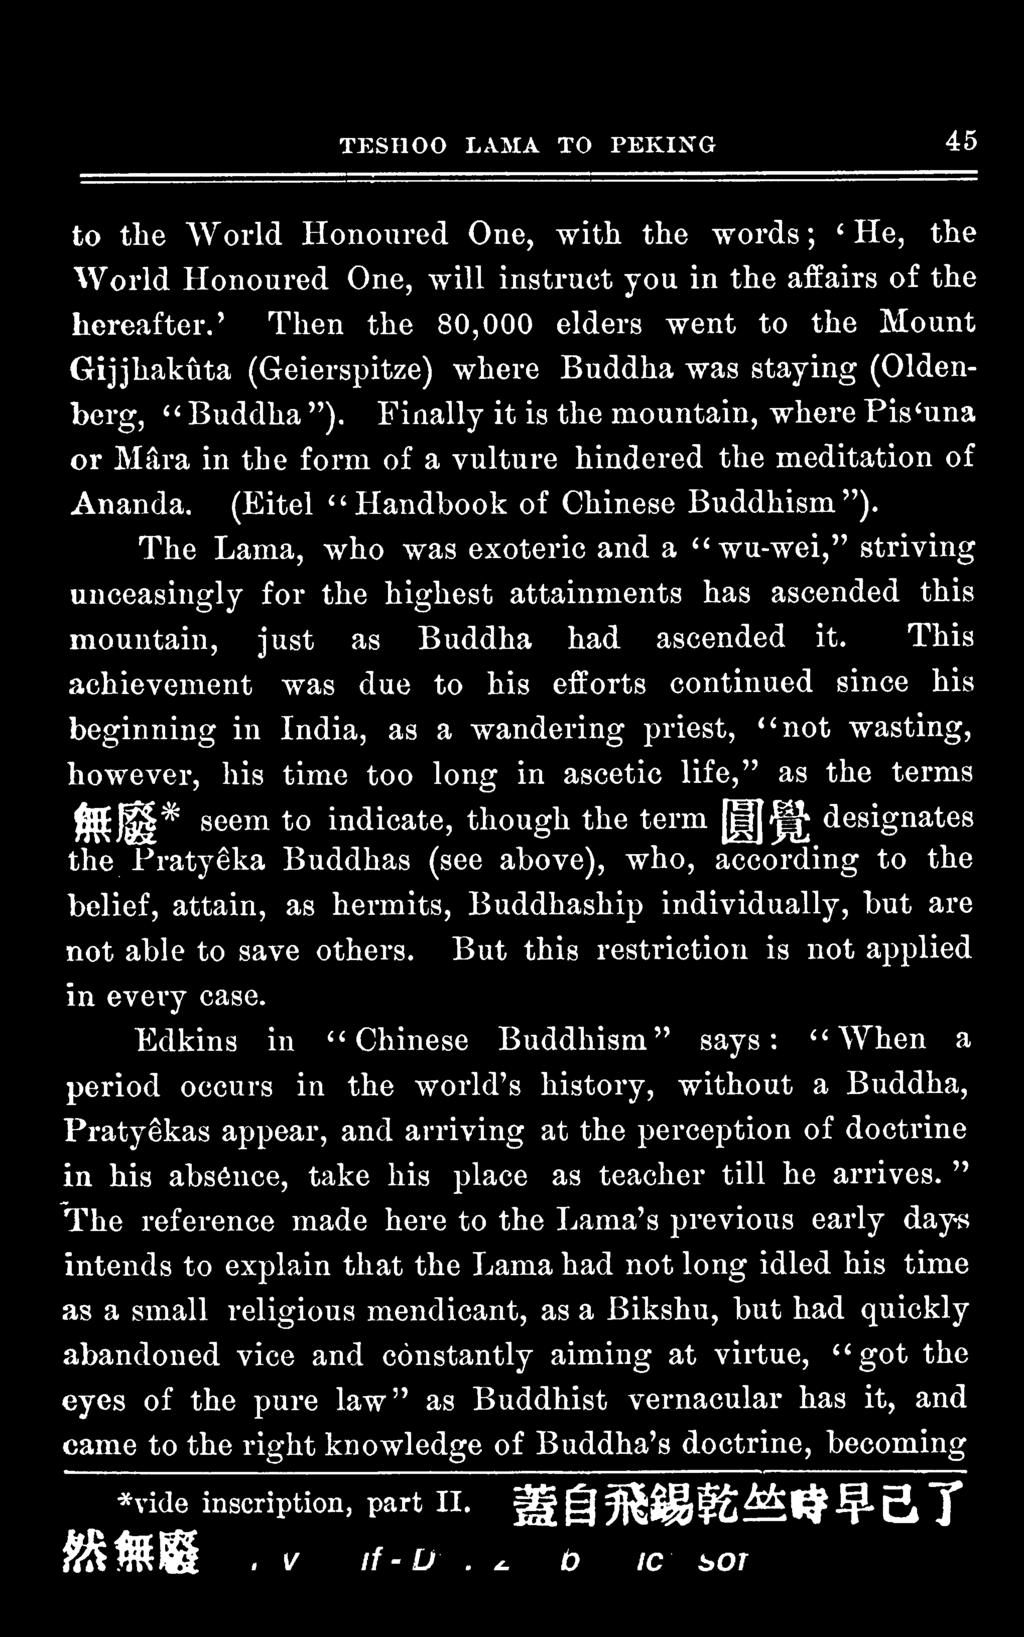 Finally it is the mountain, where Pis'una or Mara in the form of a vulture hindered the meditation of Ananda. (Eitel "Handbook of Chinese Buddhism").